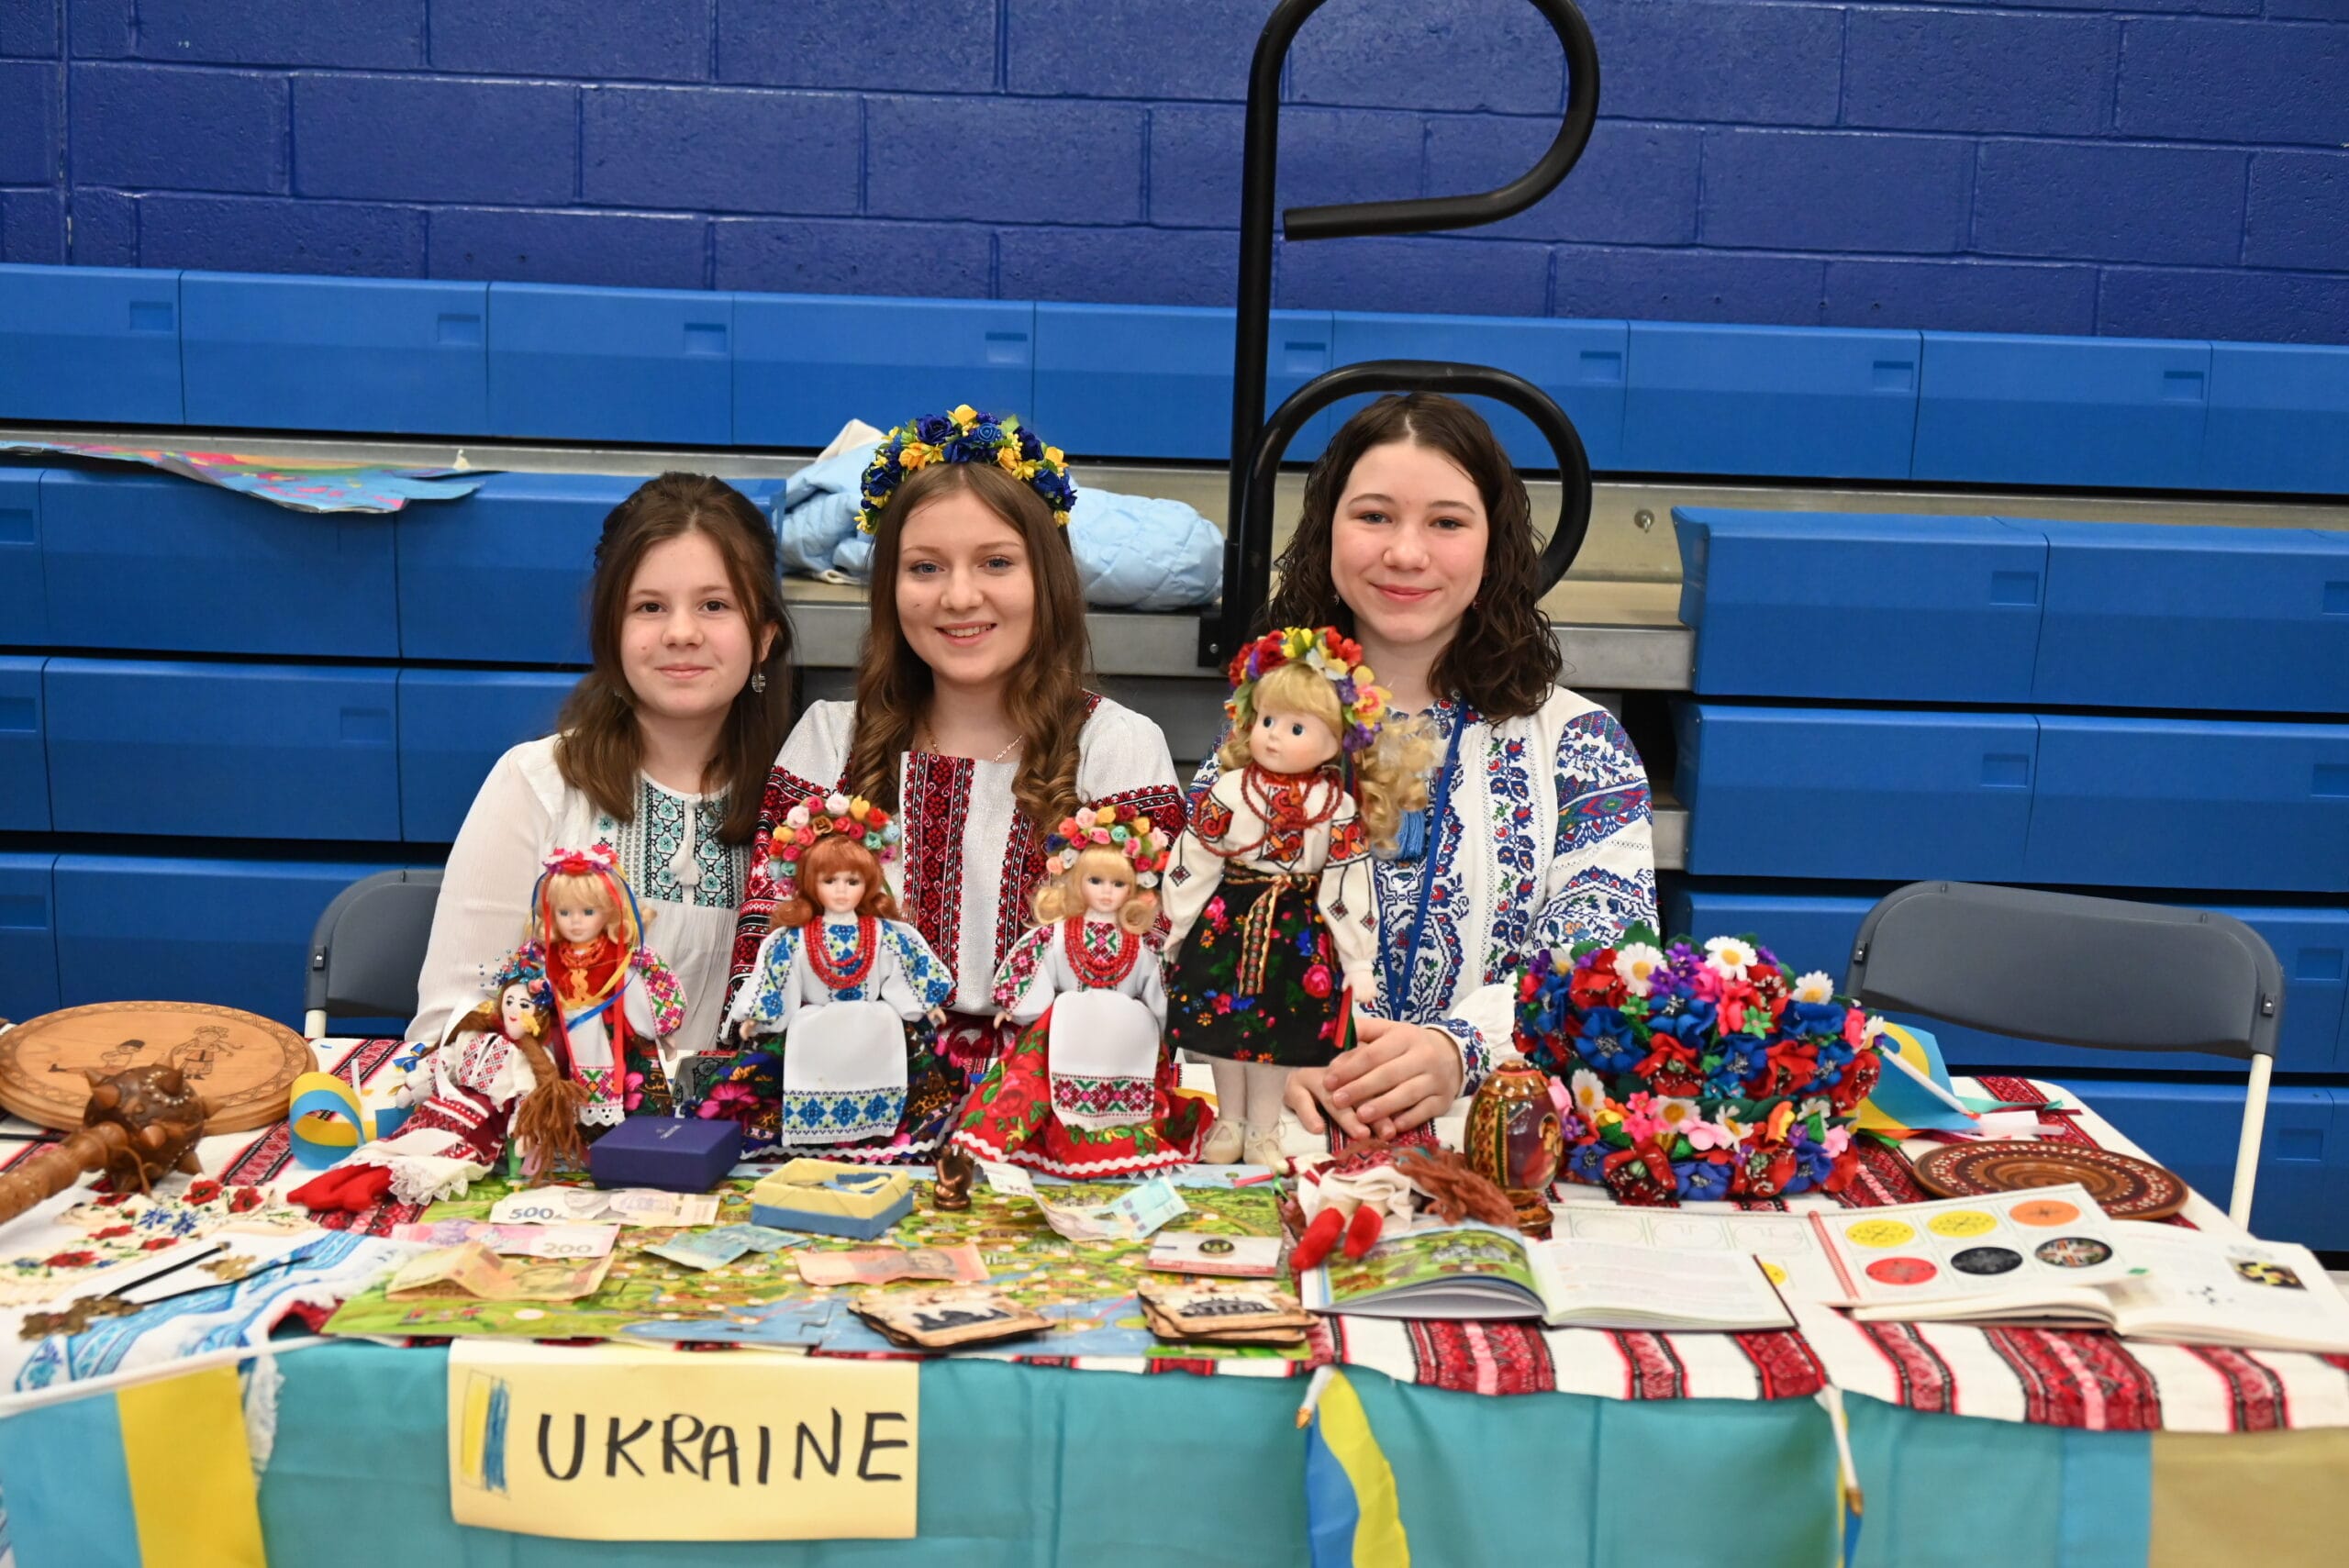 A Trip Around The World At Udall Road